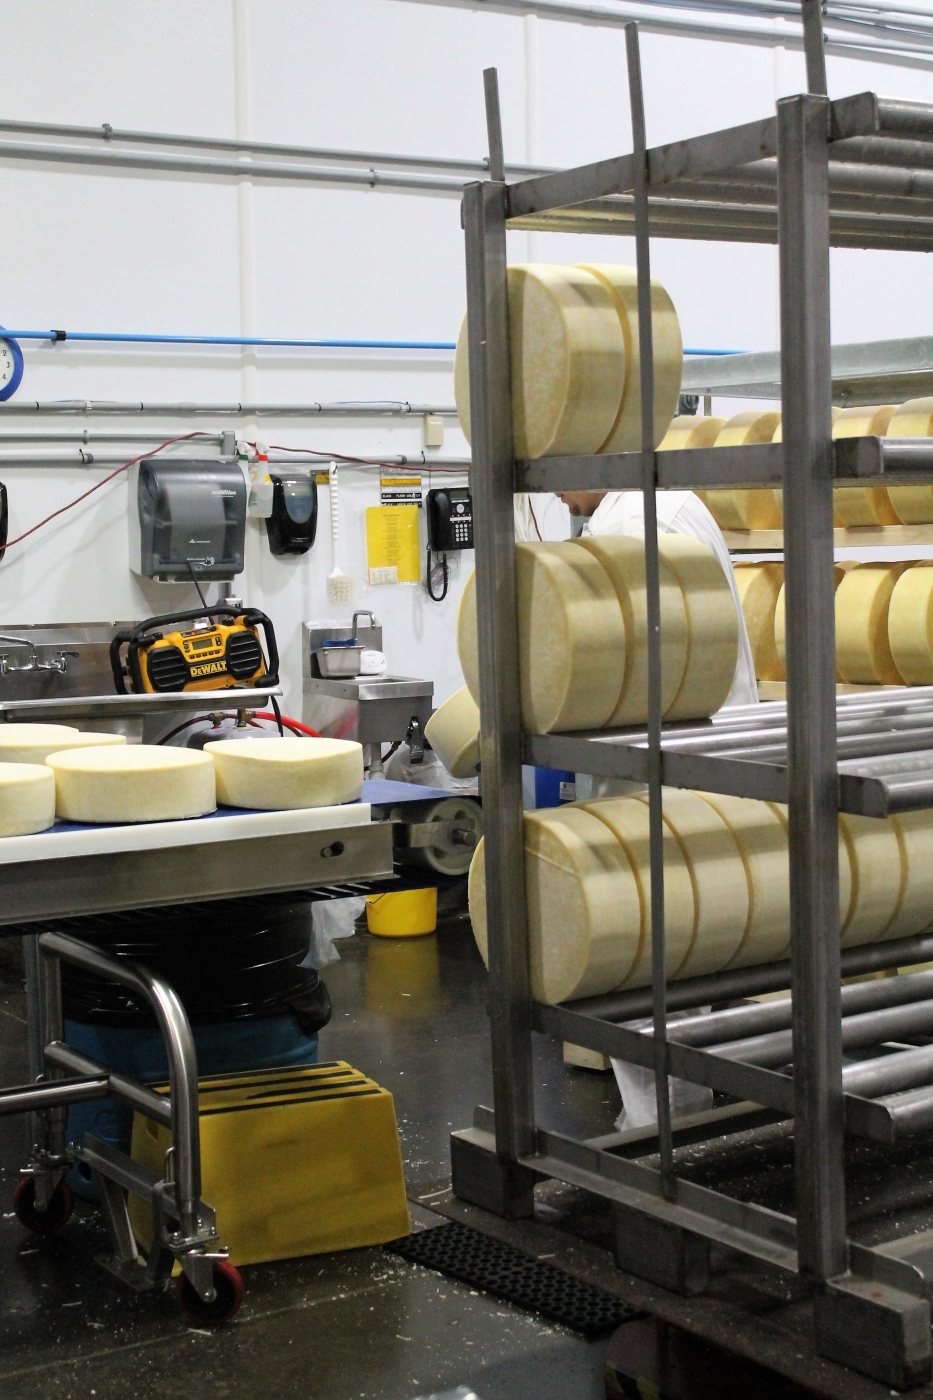 Cheese being put on belt to be packaged